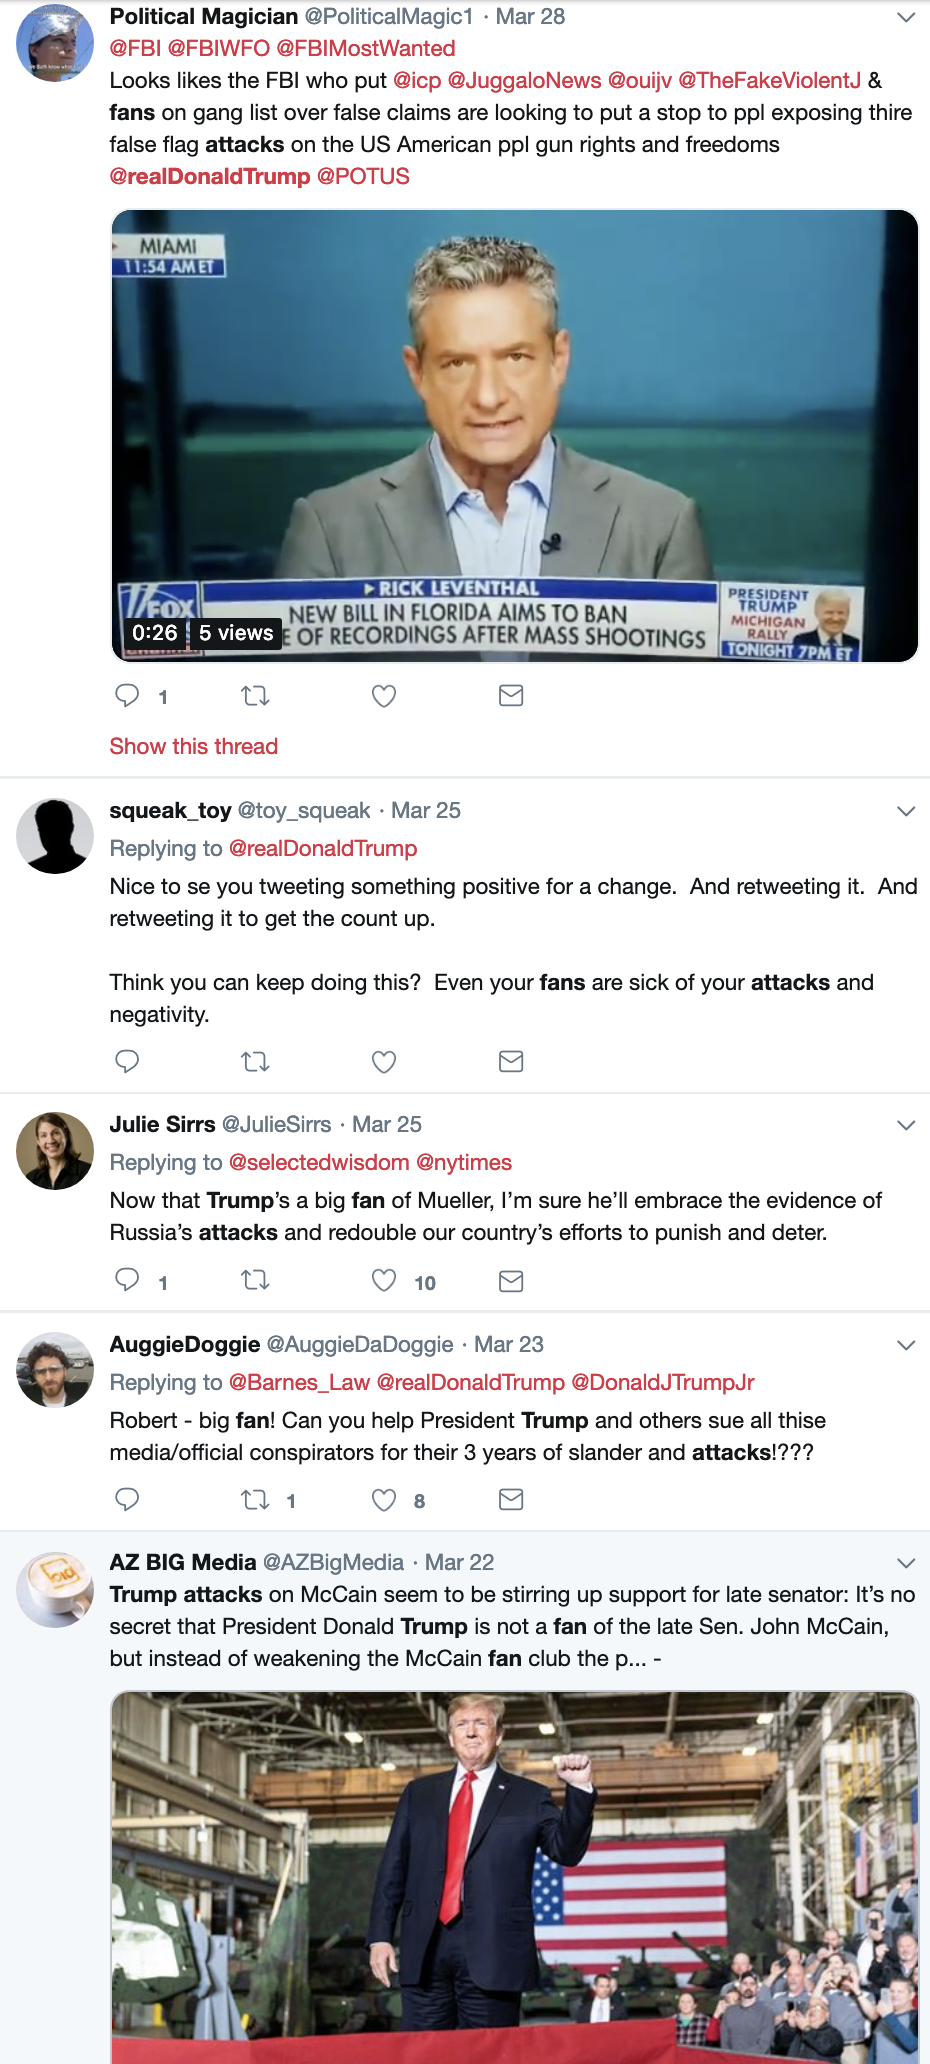 Screen-Shot-2019-03-31-at-2.38.05-PM MAGA Hat Wearing Psycho Pulls Out Sword & Attacks Crowd (DETAILS) Corruption Crime Donald Trump Election 2020 Politics Top Stories 